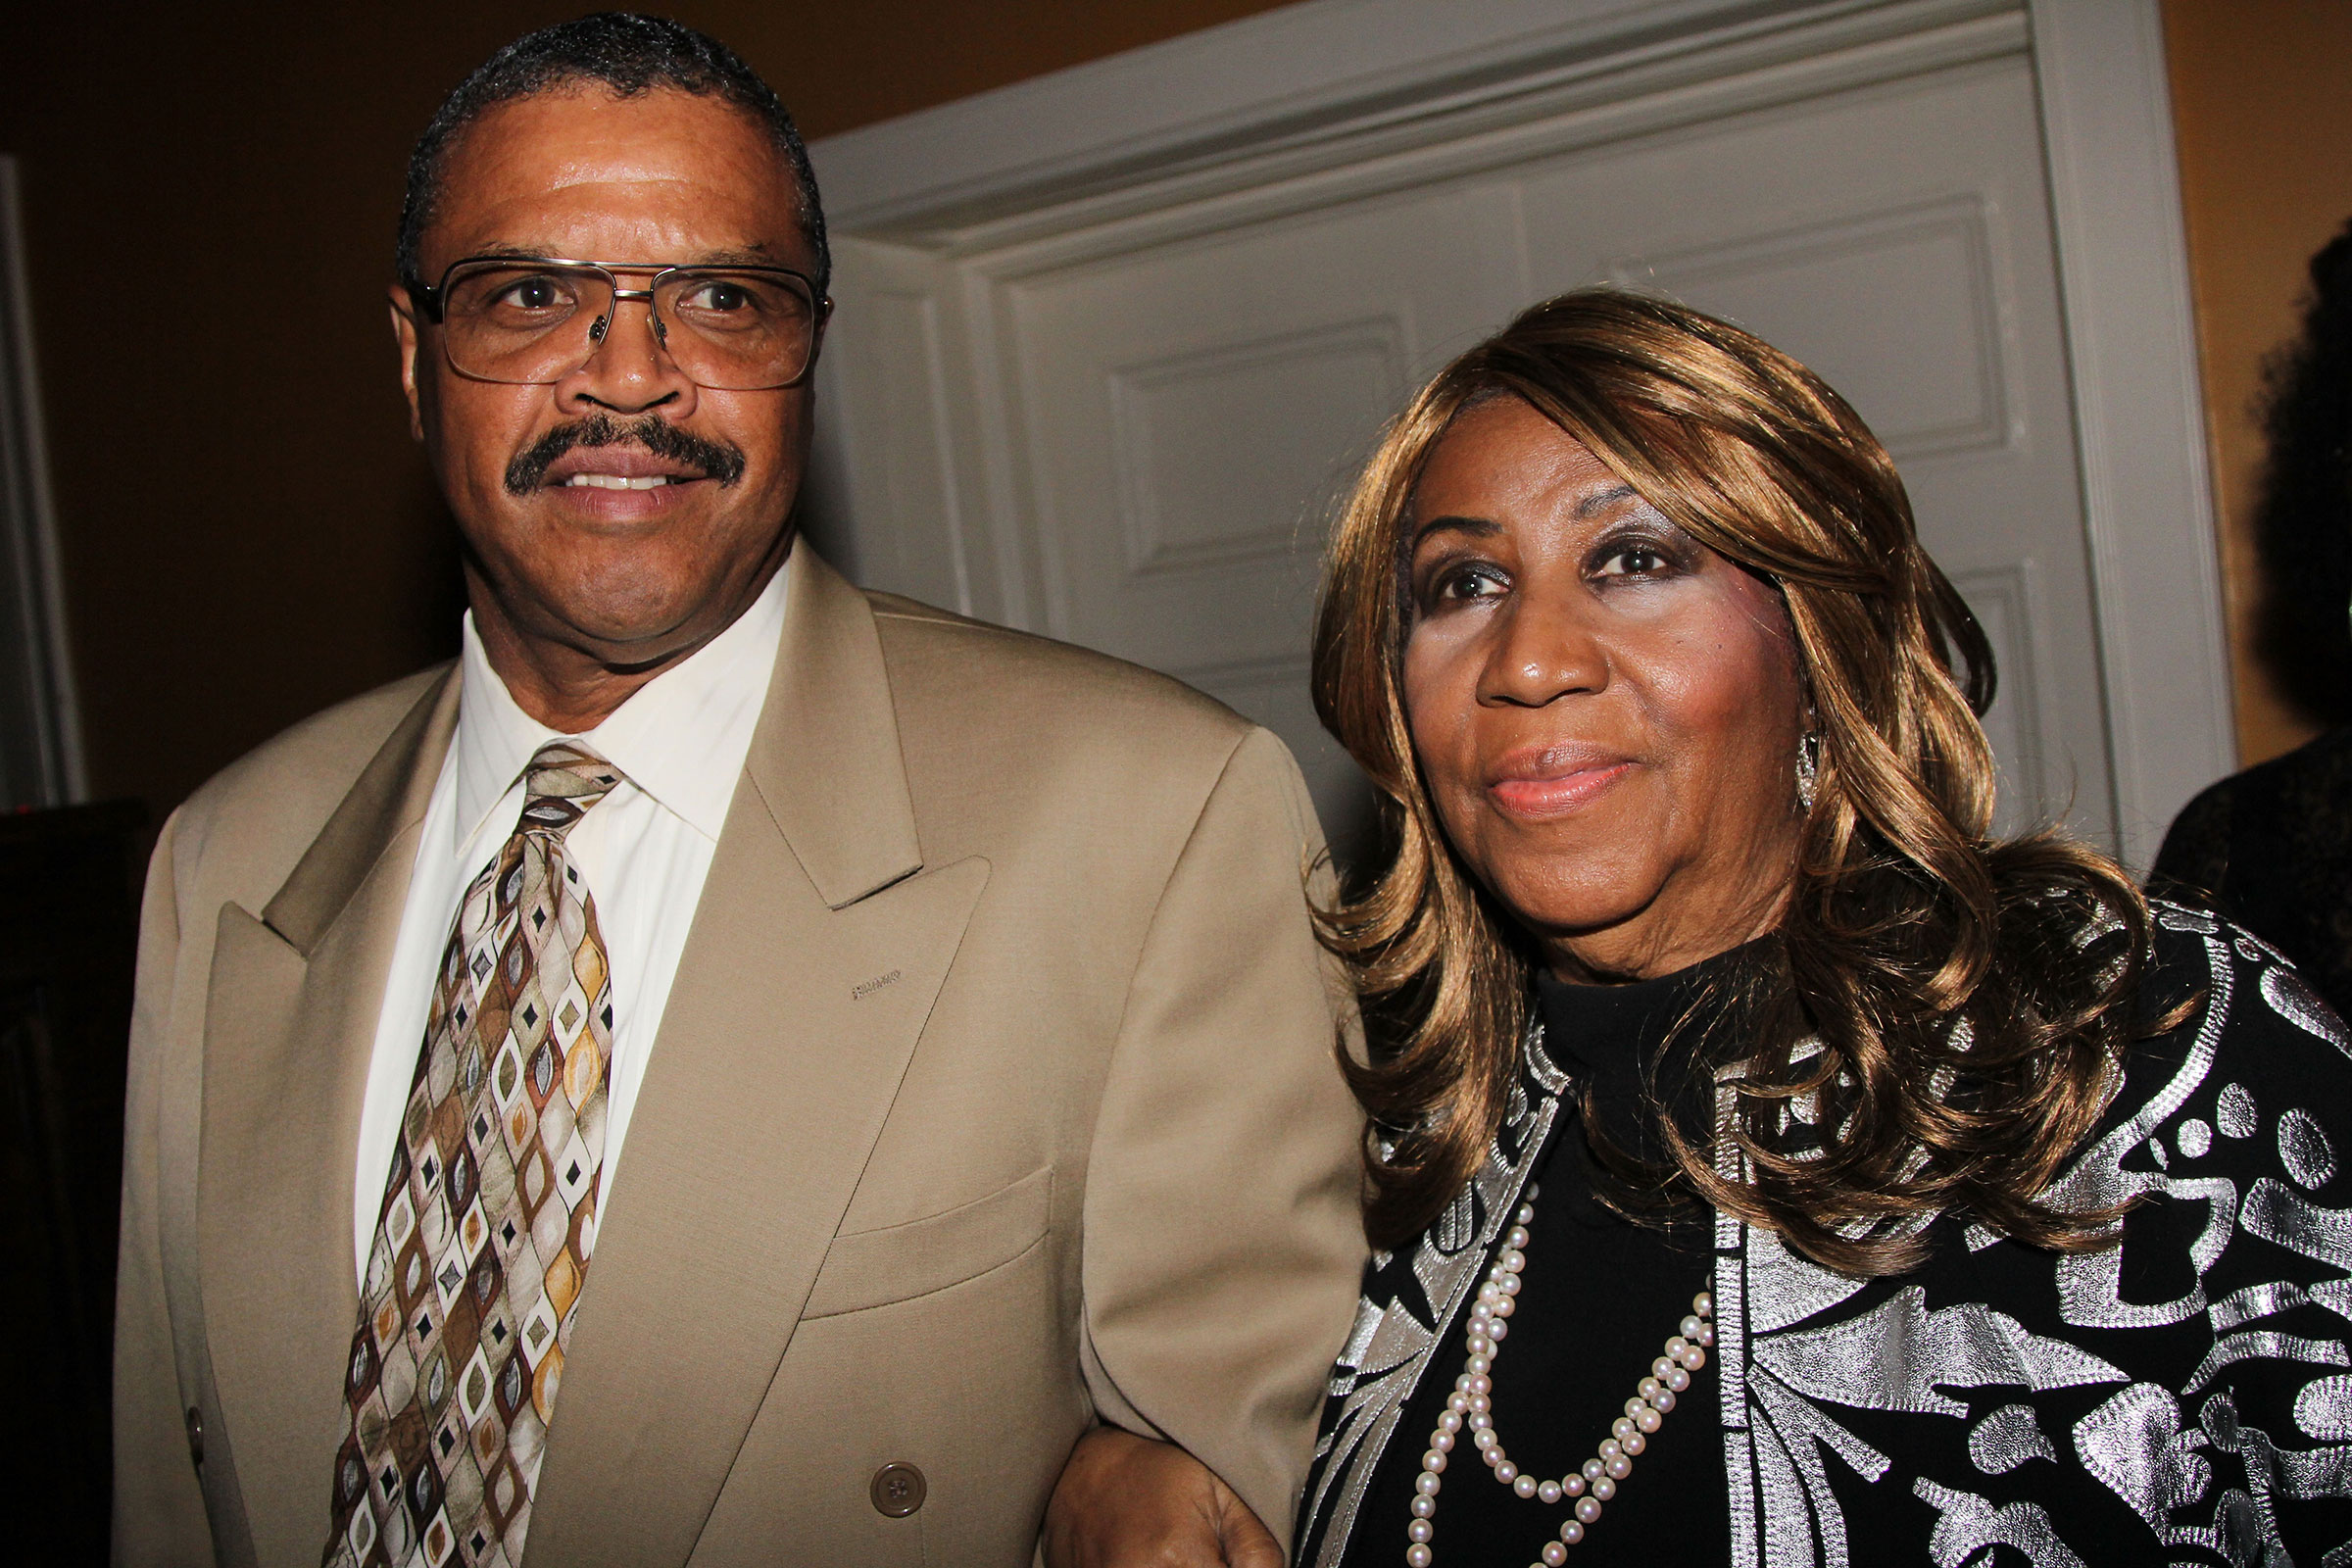 Willie Wilkerson and Aretha Franklin in New York City in September 2012.